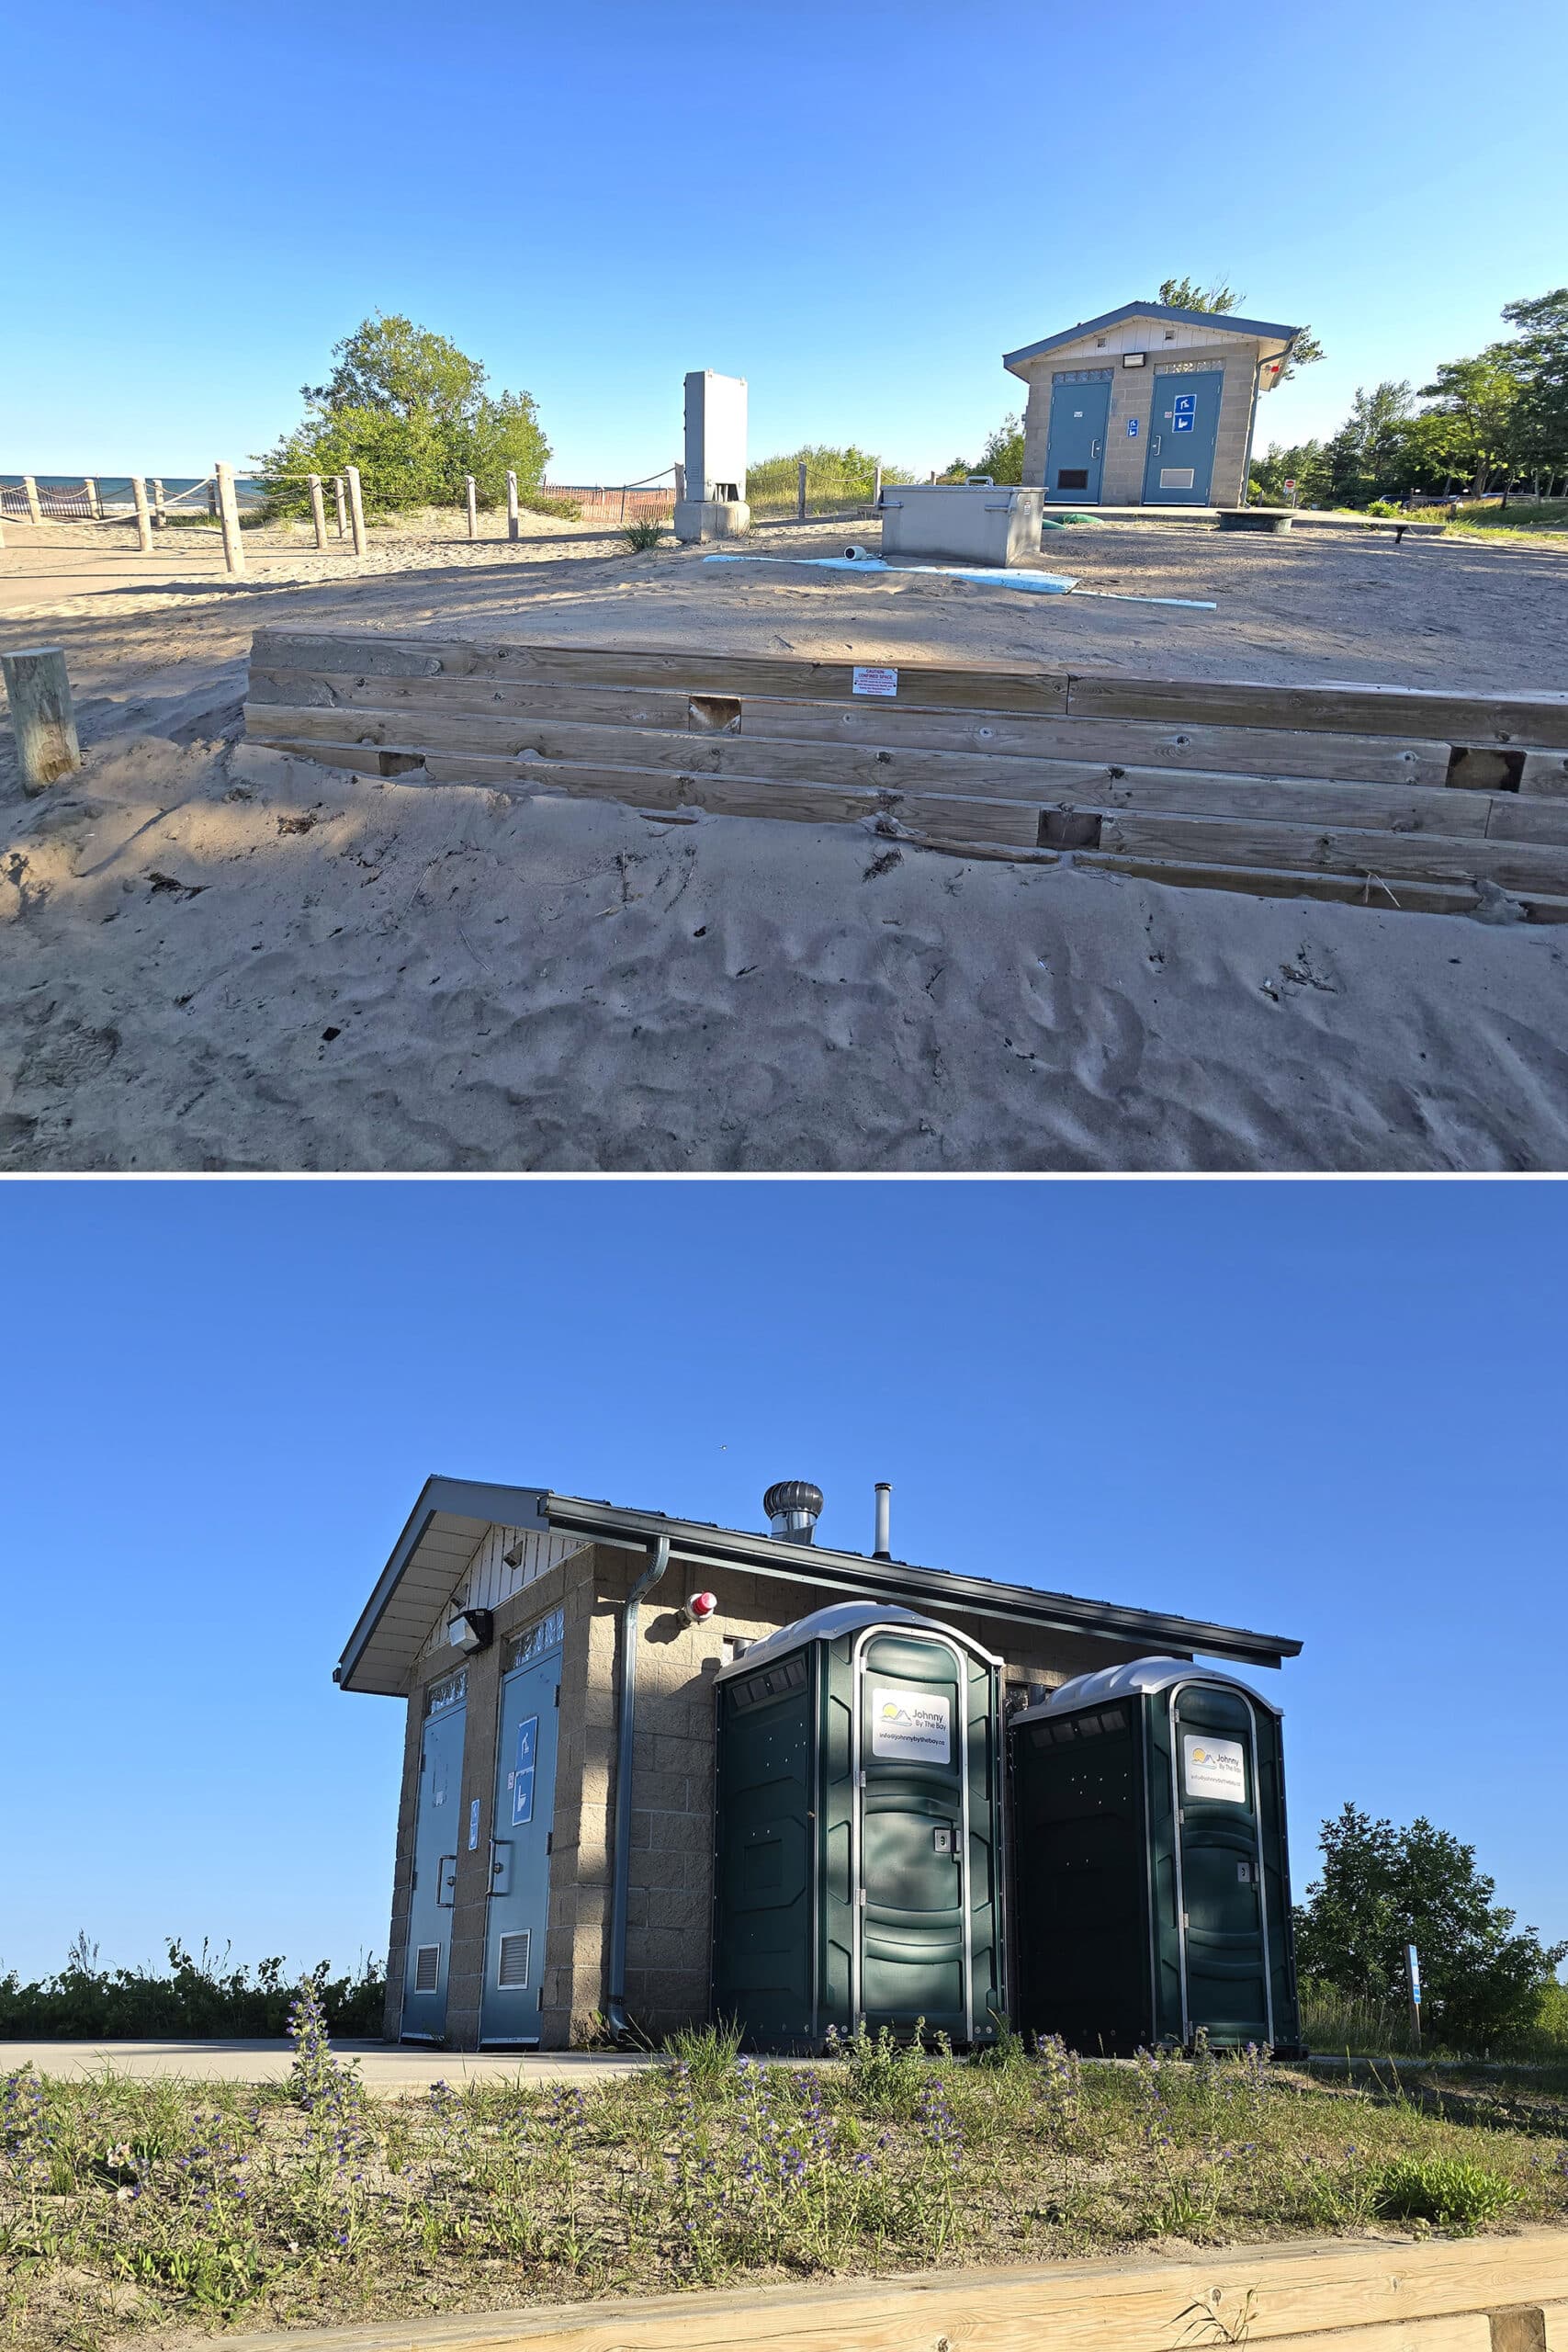 2 part image showing two different small comfort stations, one with porta potties outside.